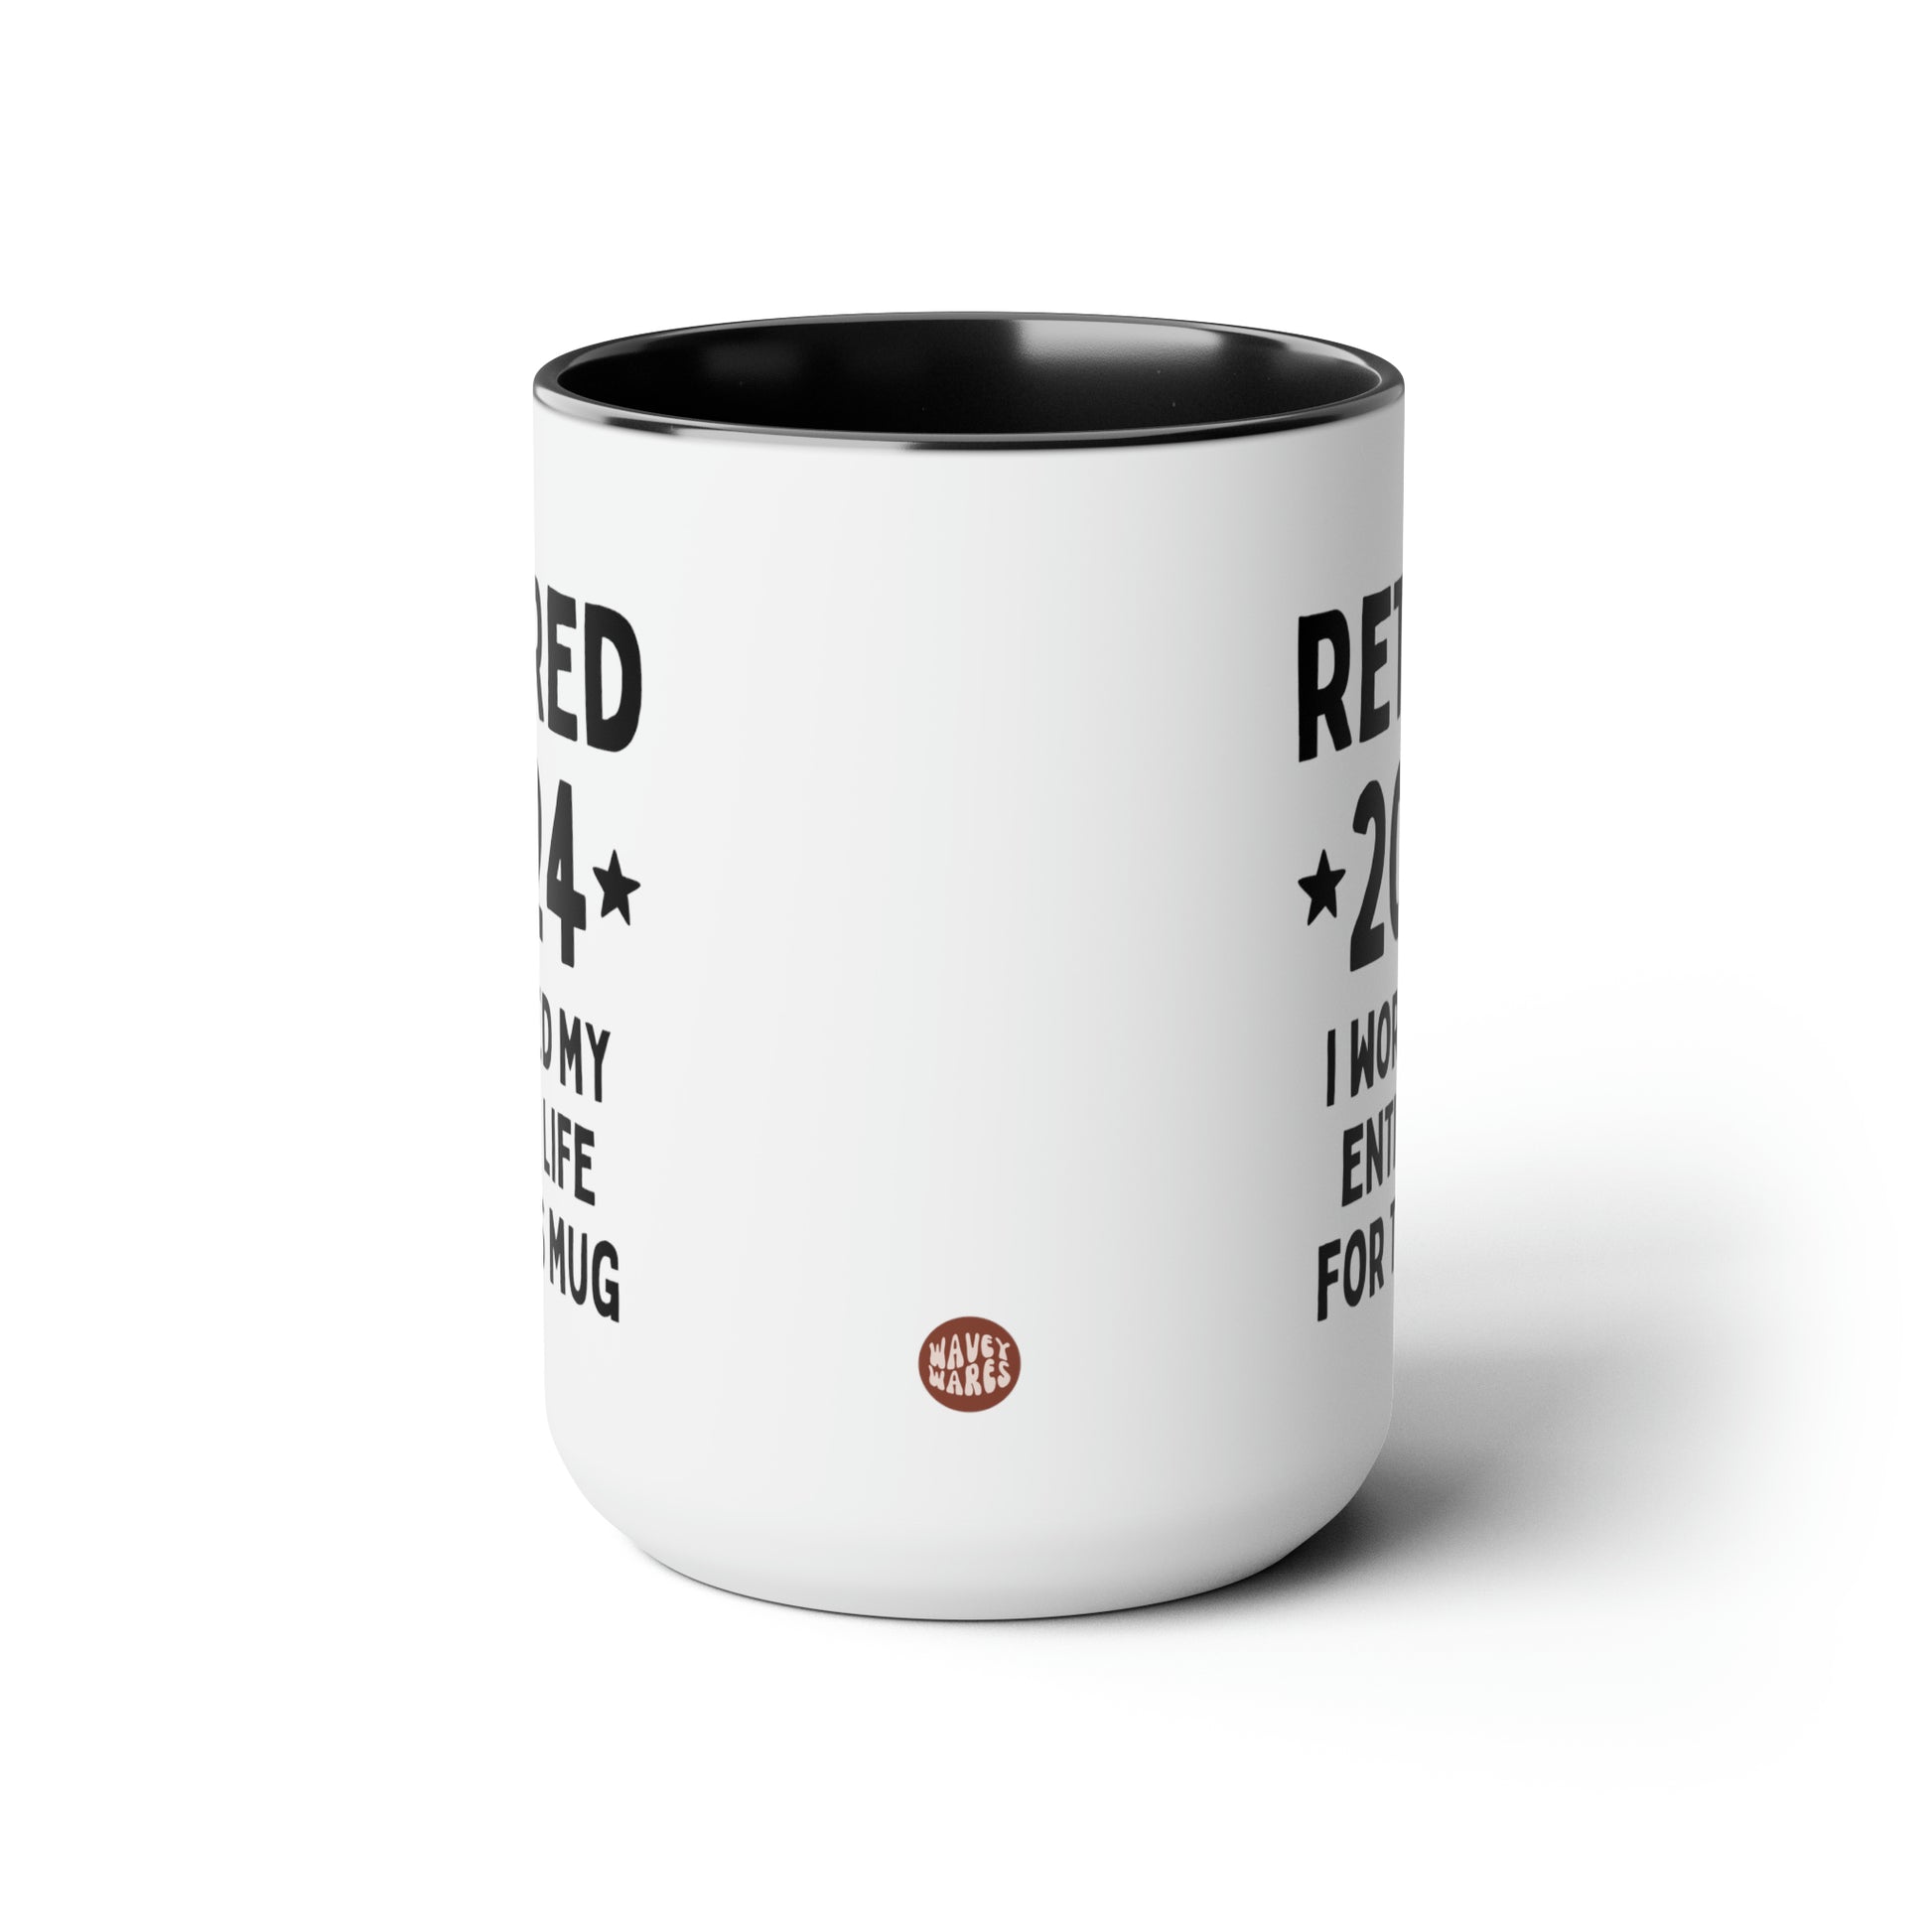 Retired 2024 I Worked My Entire Life For This Mug 15oz white with black accent funny large coffee mug gift for retirement man woman waveywares wavey wares wavywares wavy wares side